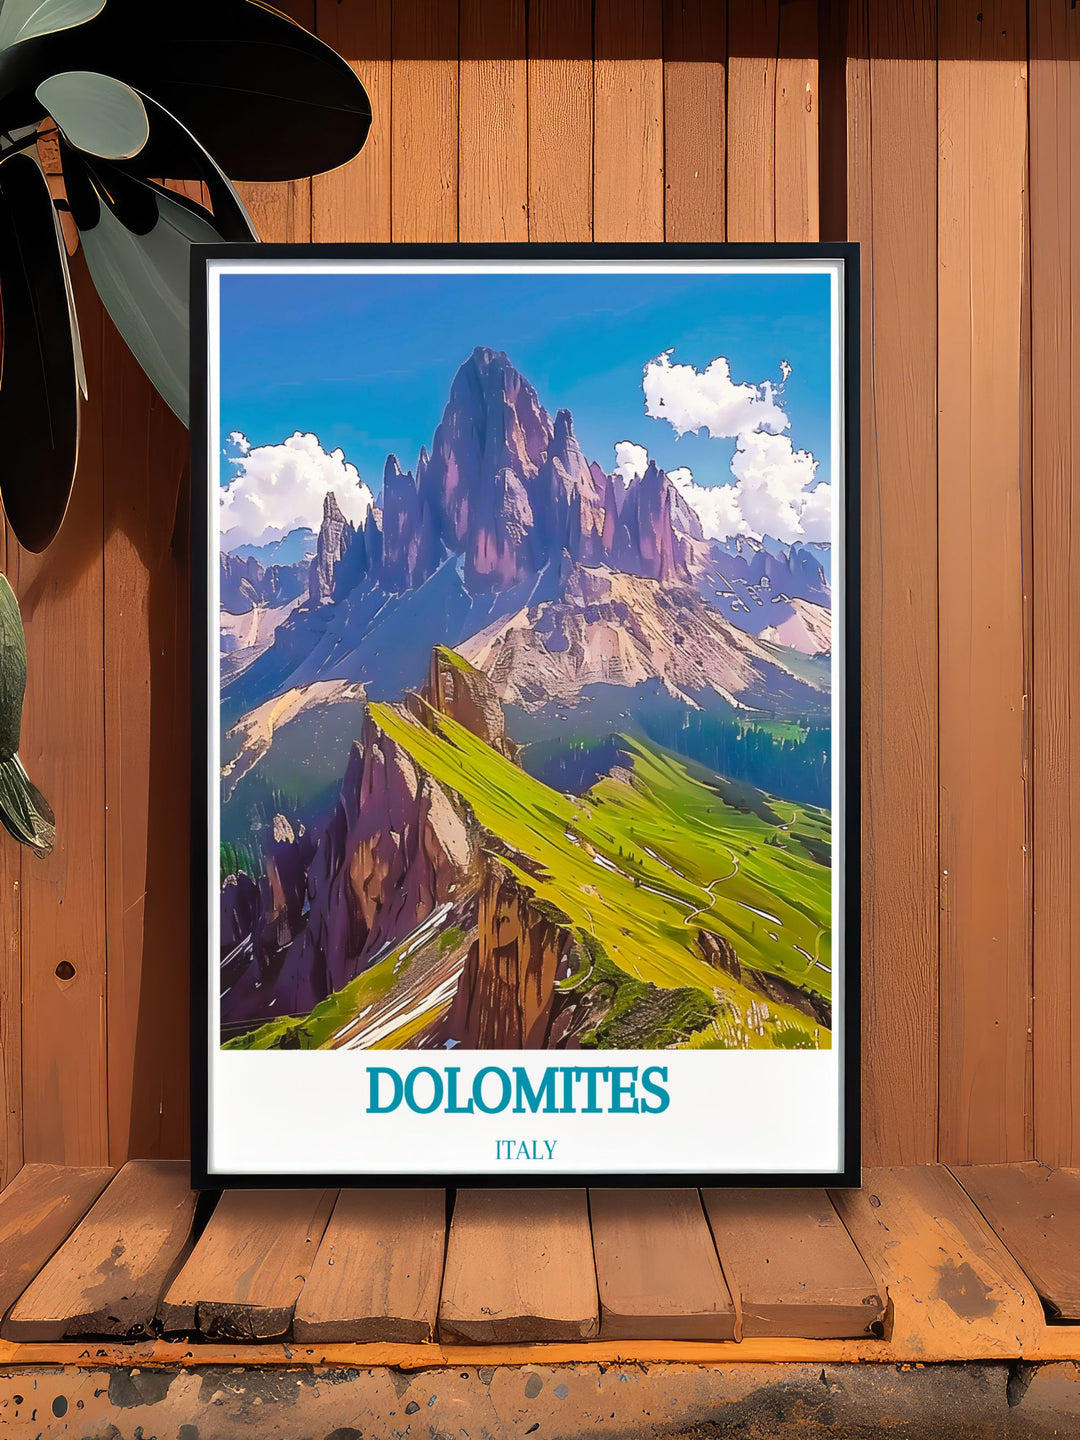 Gallery wall art illustrating the majestic landscapes of Seceda, with its towering cliffs and serene vistas, perfect for enhancing any room with the charm of the Dolomites.